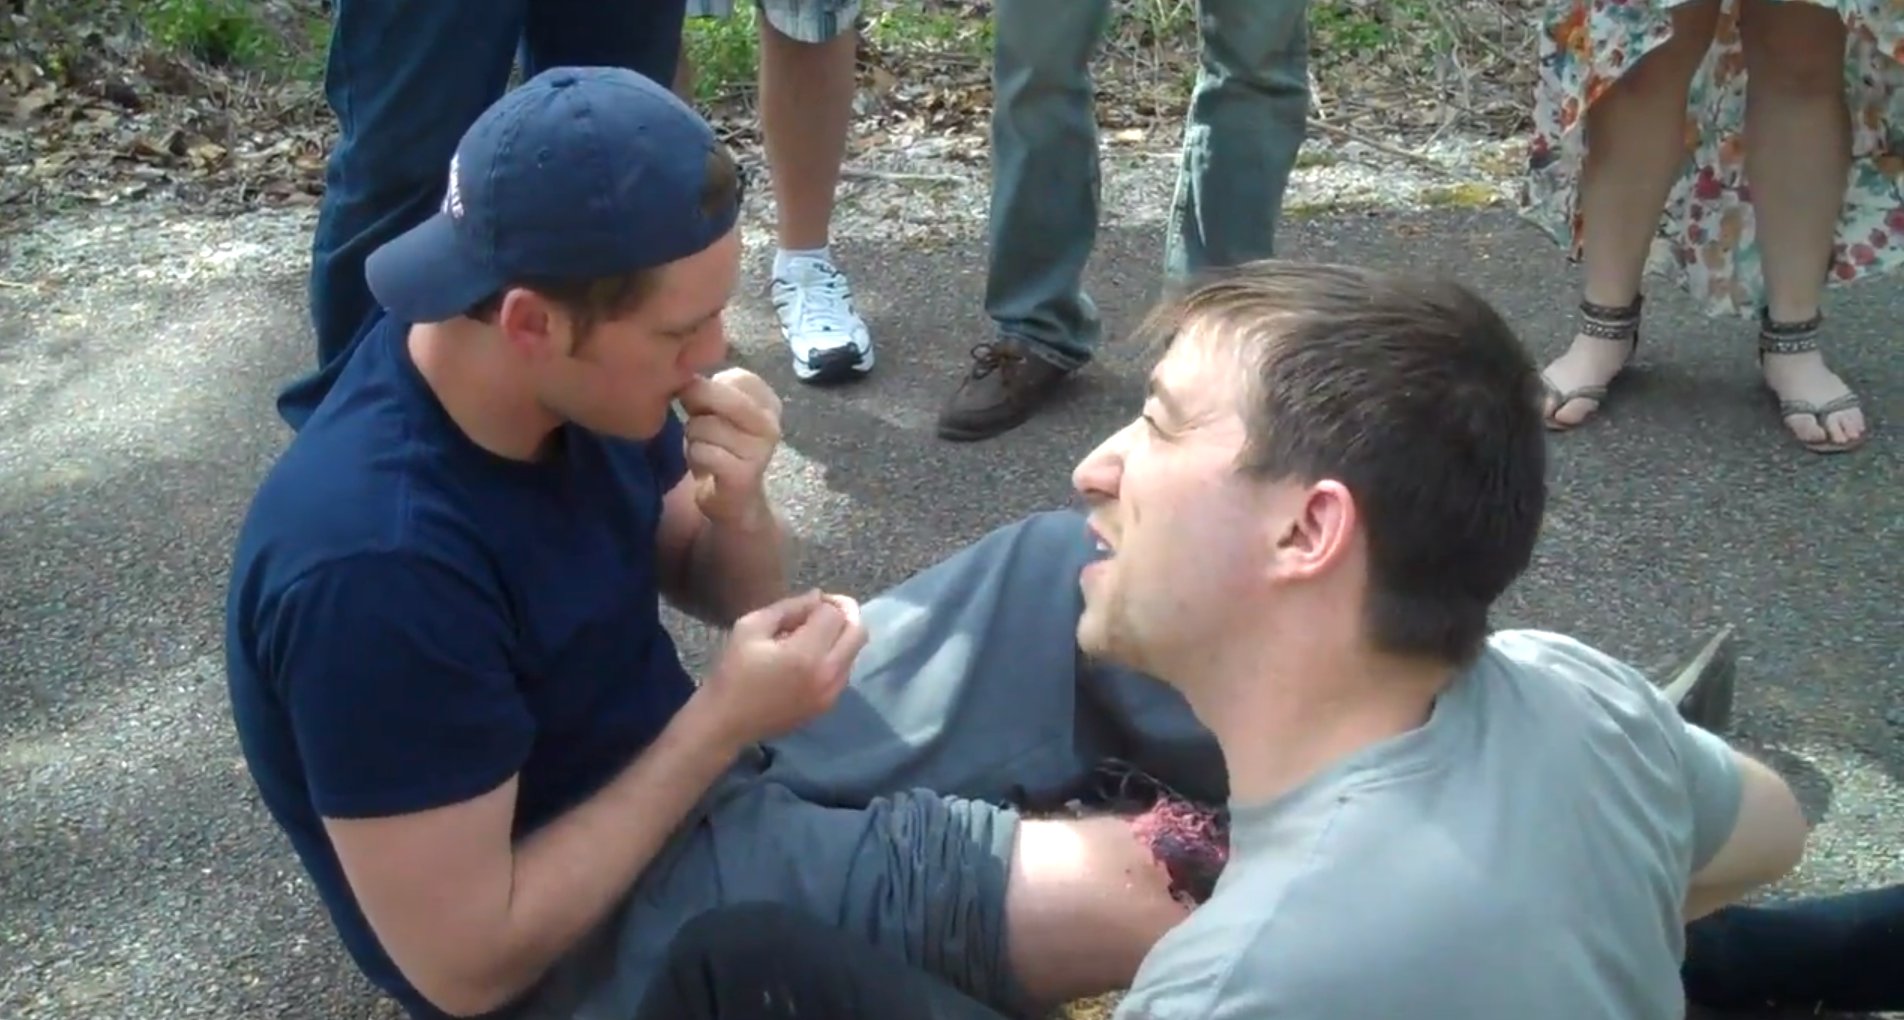 Applying a gun shot wound to Actor Tommy Martin on location for 'New World OrdeRx' (2013)